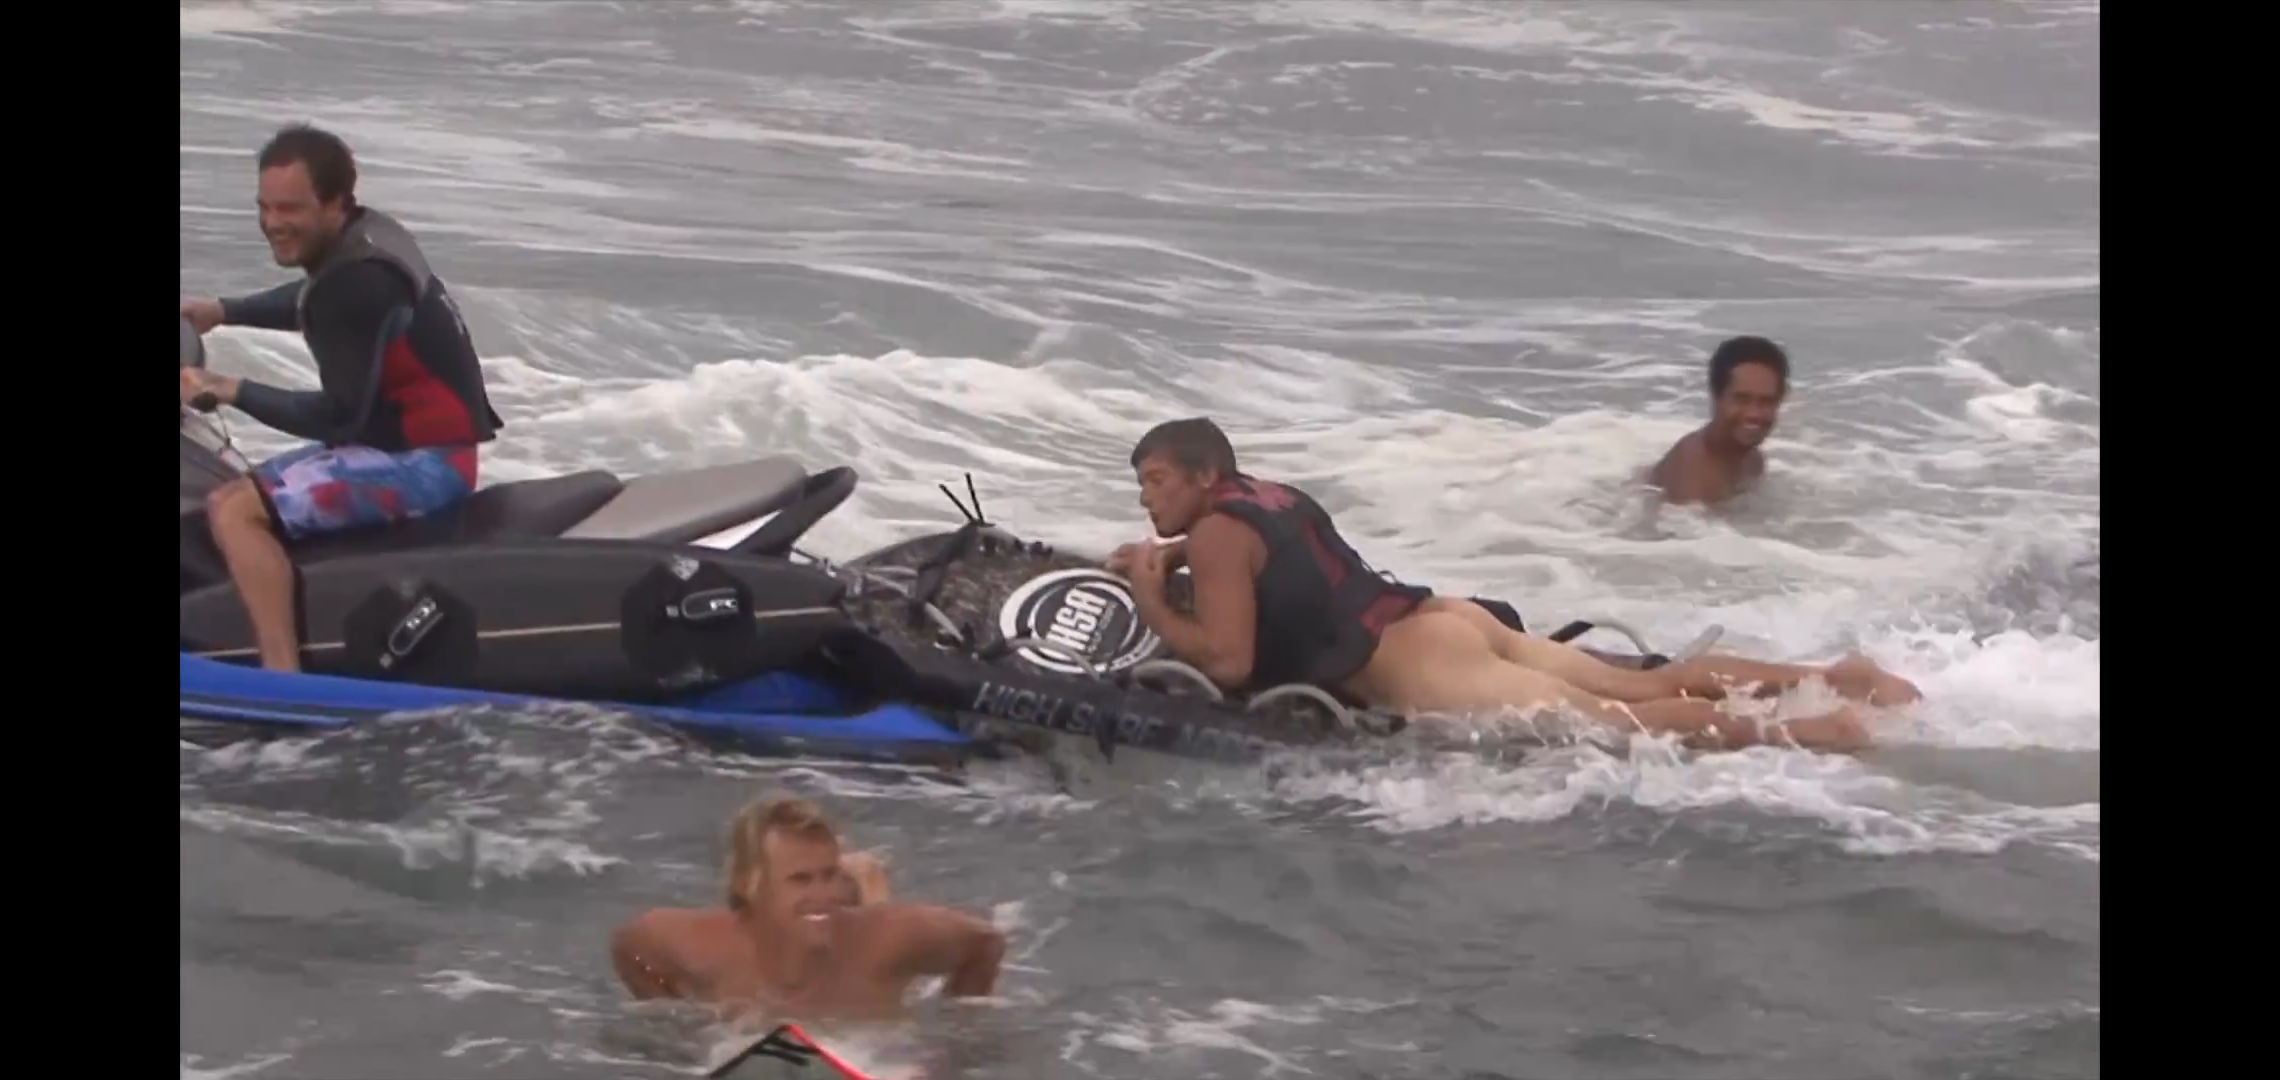 Surfer Loses Trunks in Wipeout